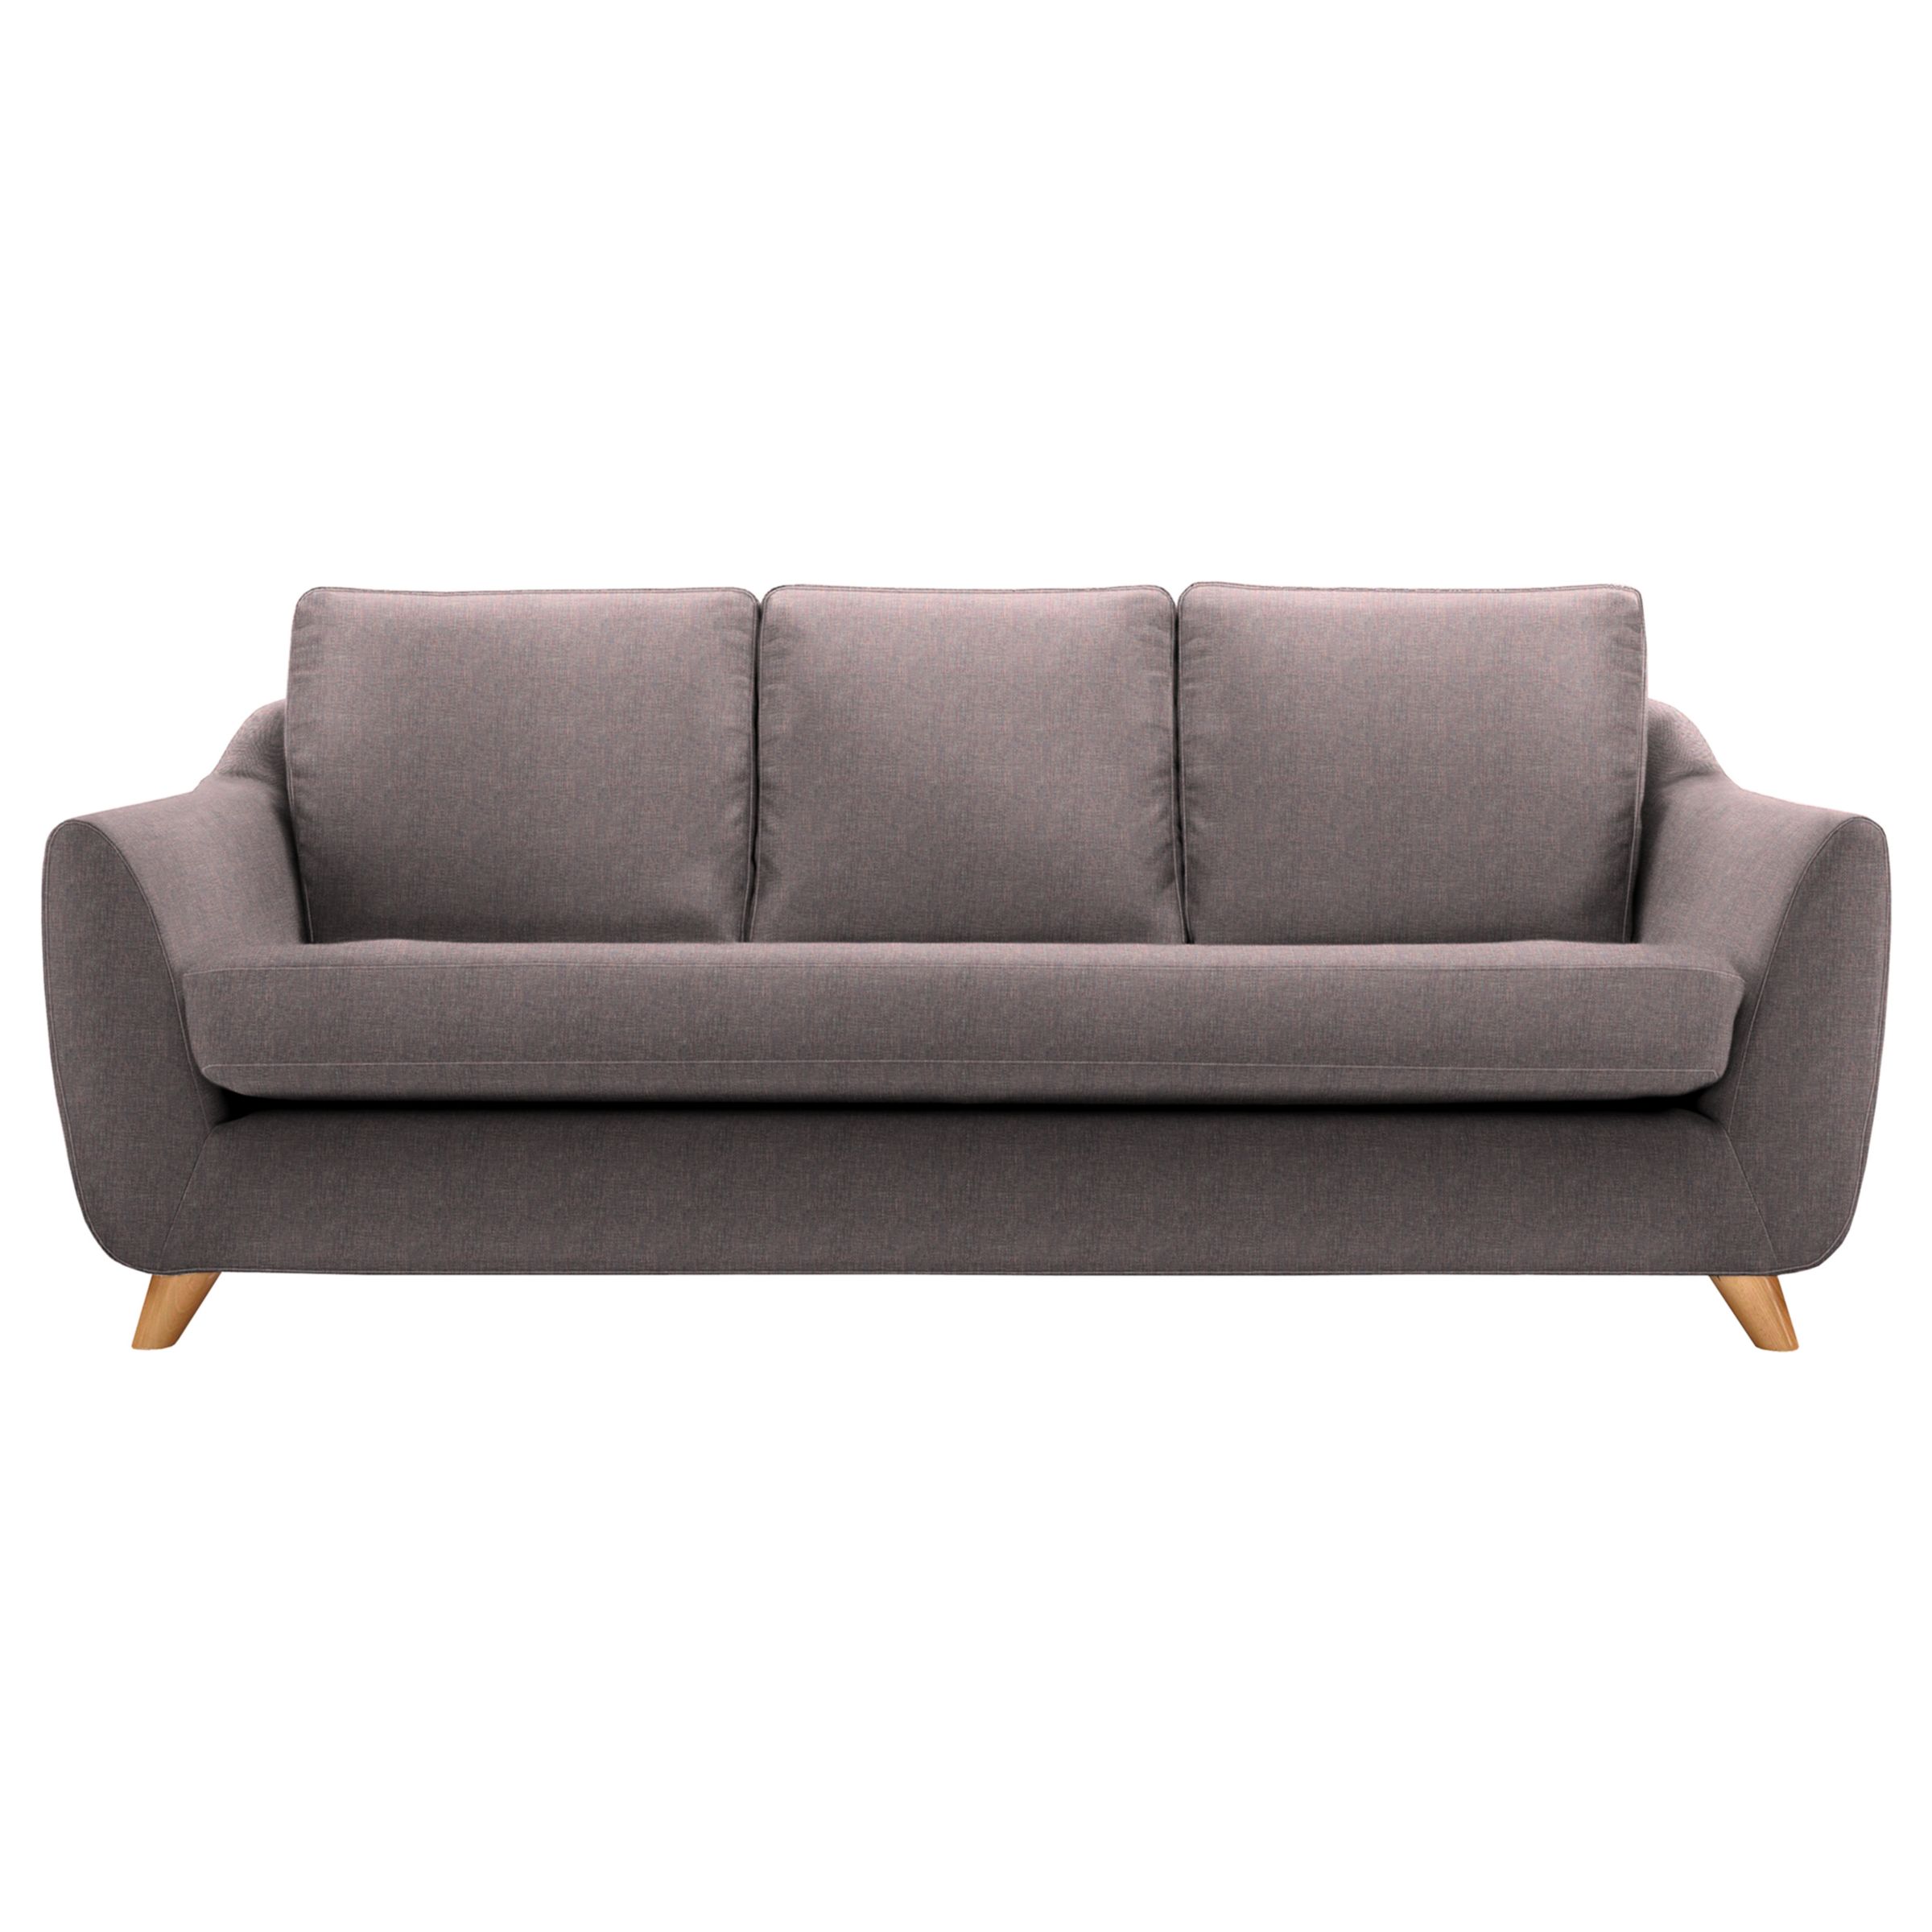 G Plan Vintage The Sixty Seven Large 3 Seater Sofa, Marl Aubergine